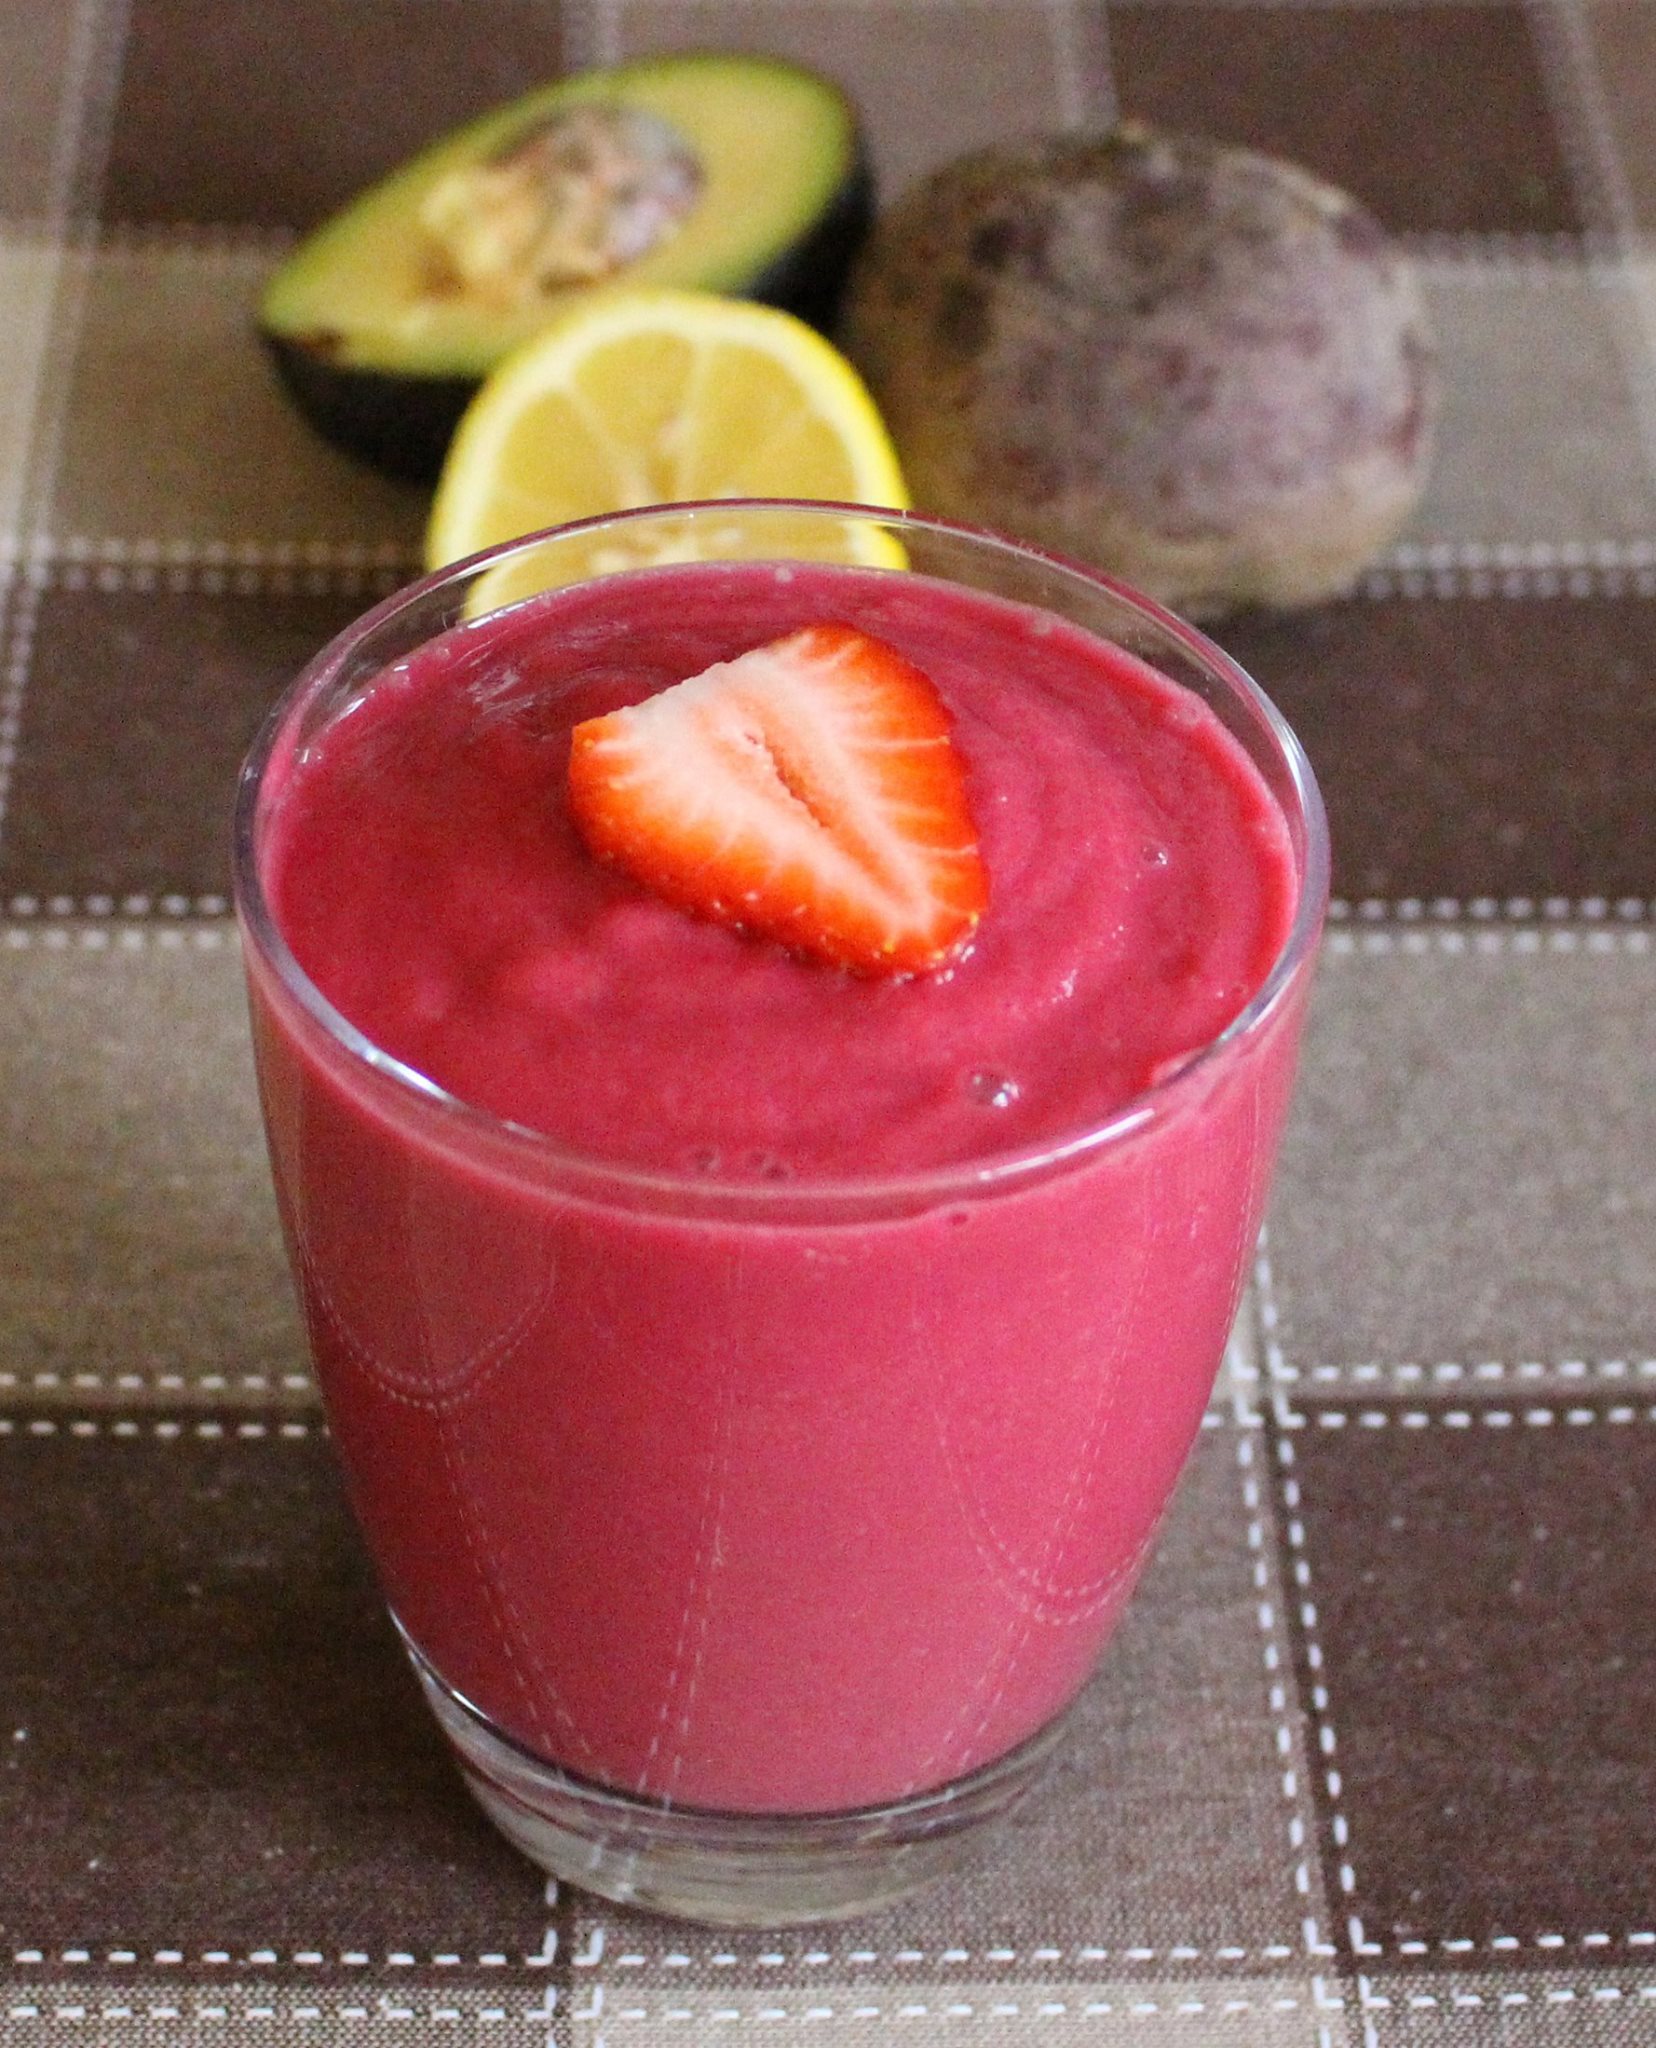 strawberry smoothie with lemon and avocado on the side